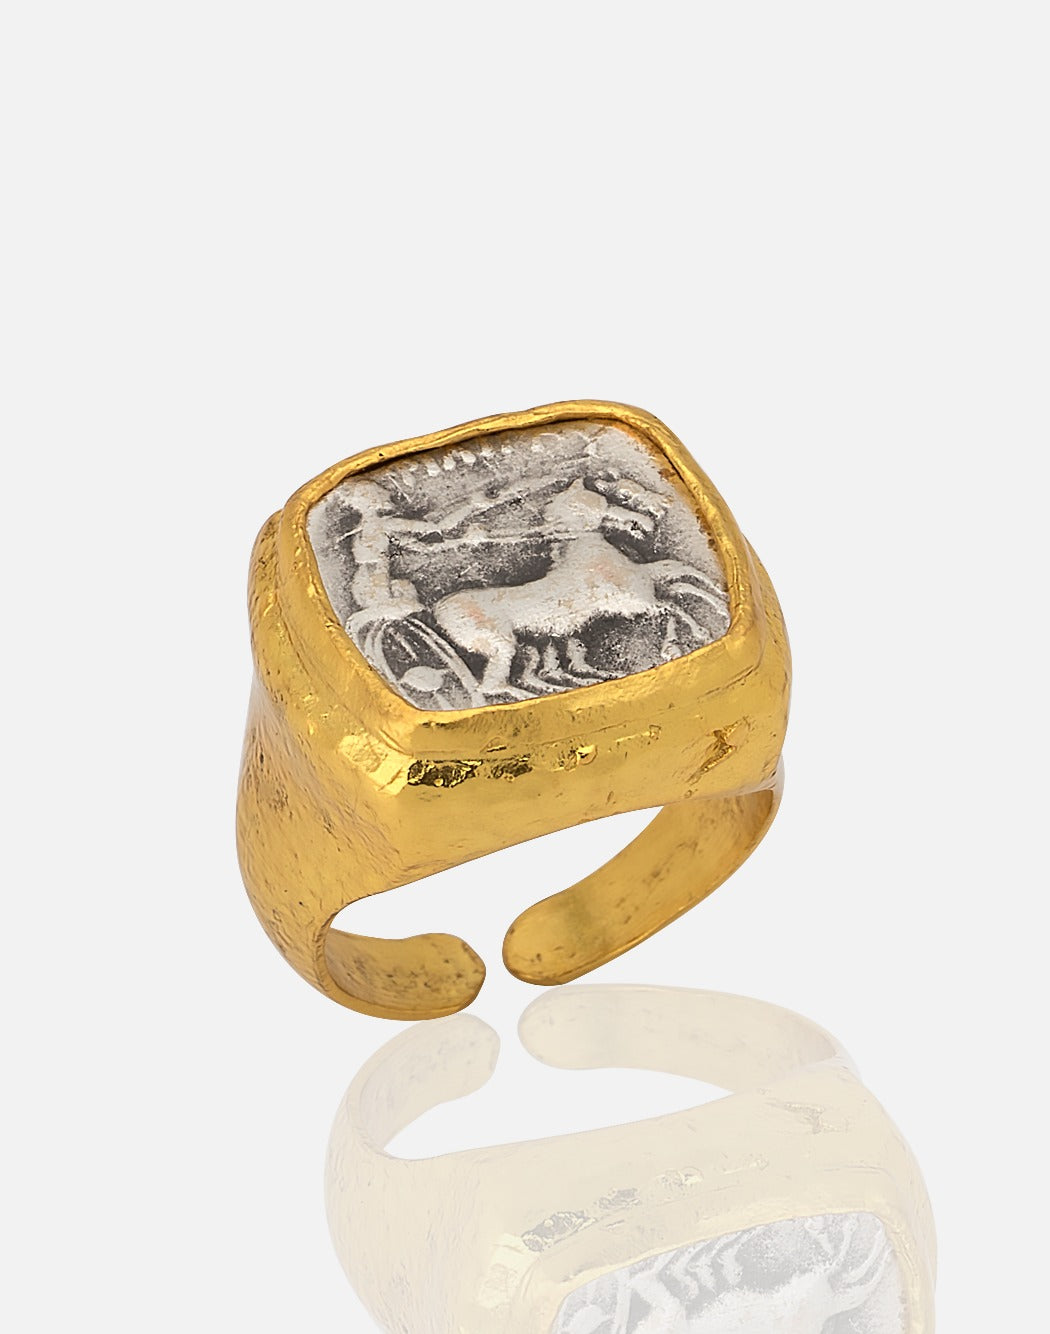 Adjustable two-tone coin ring with square setting